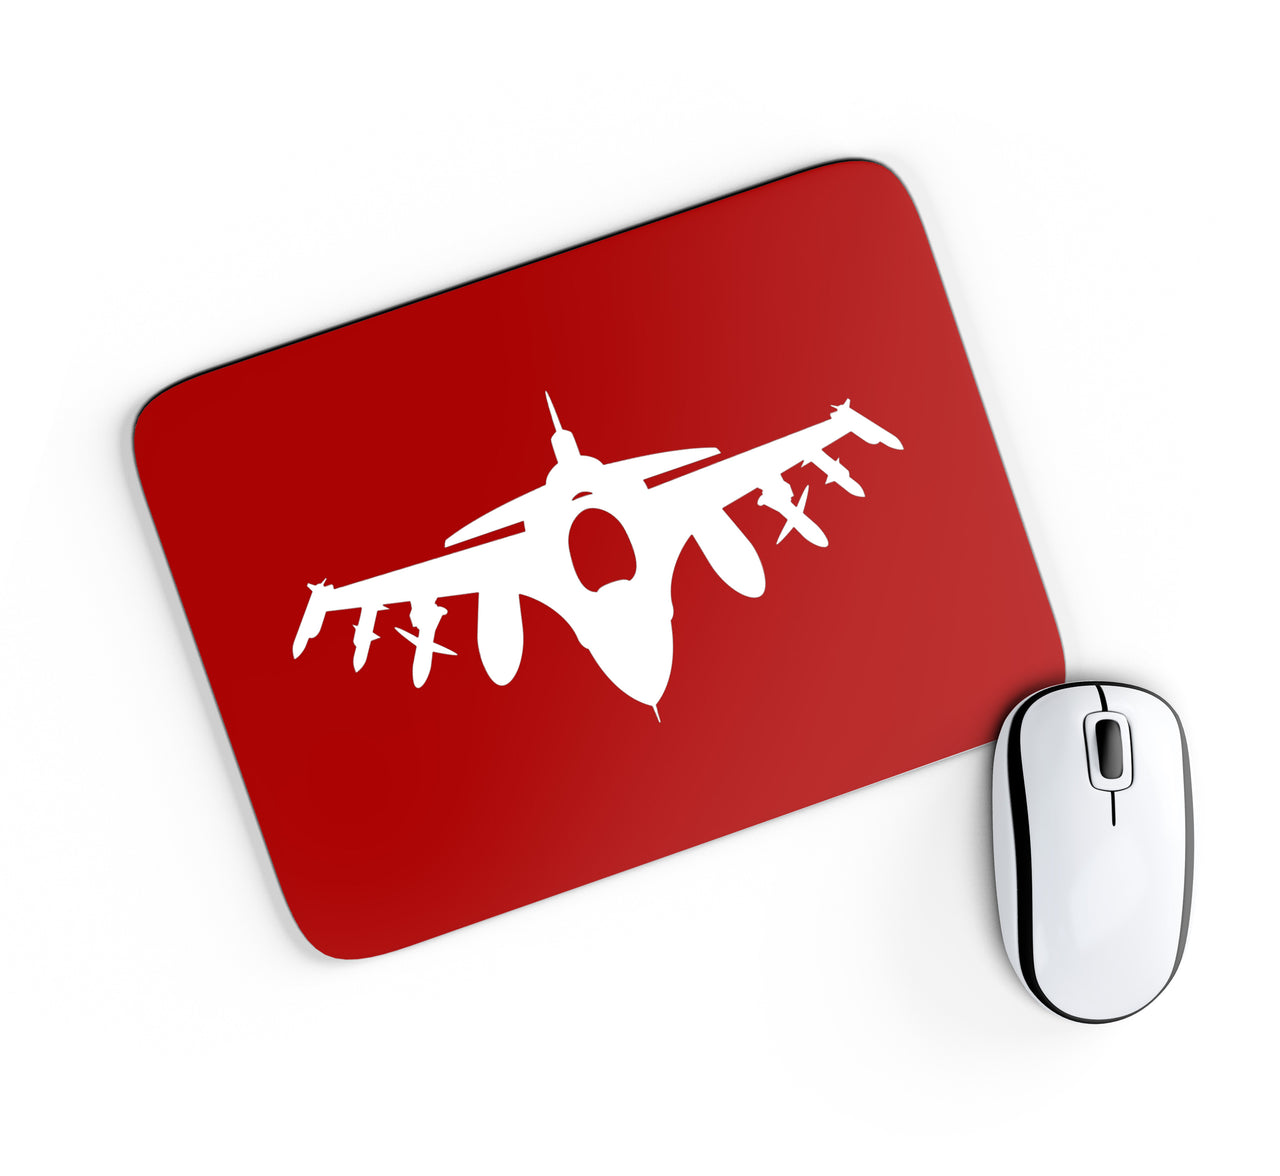 Fighting Falcon F16 Silhouette Designed Mouse Pads